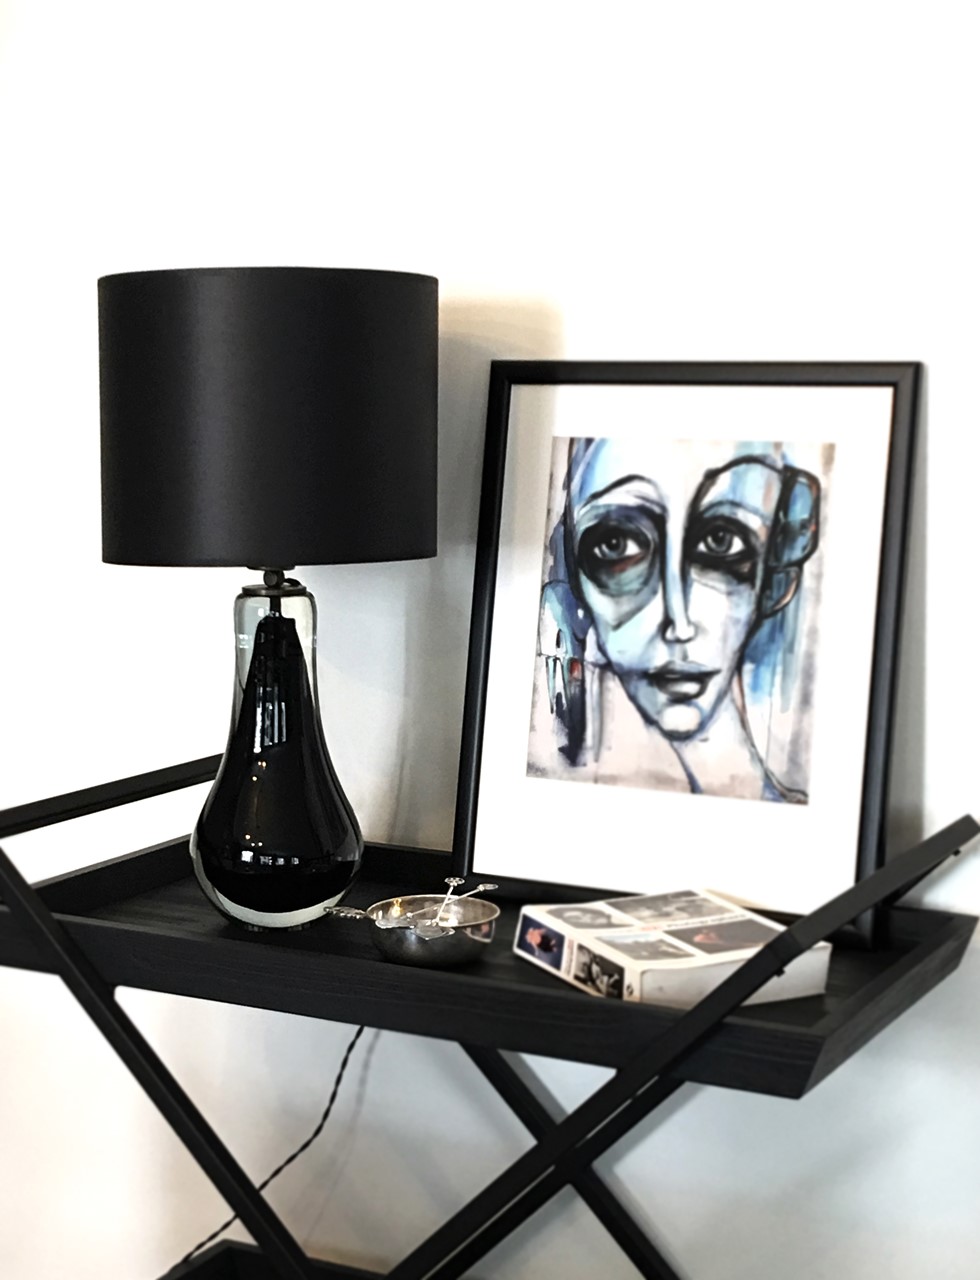 Picture of Harmony Black Table Lamp